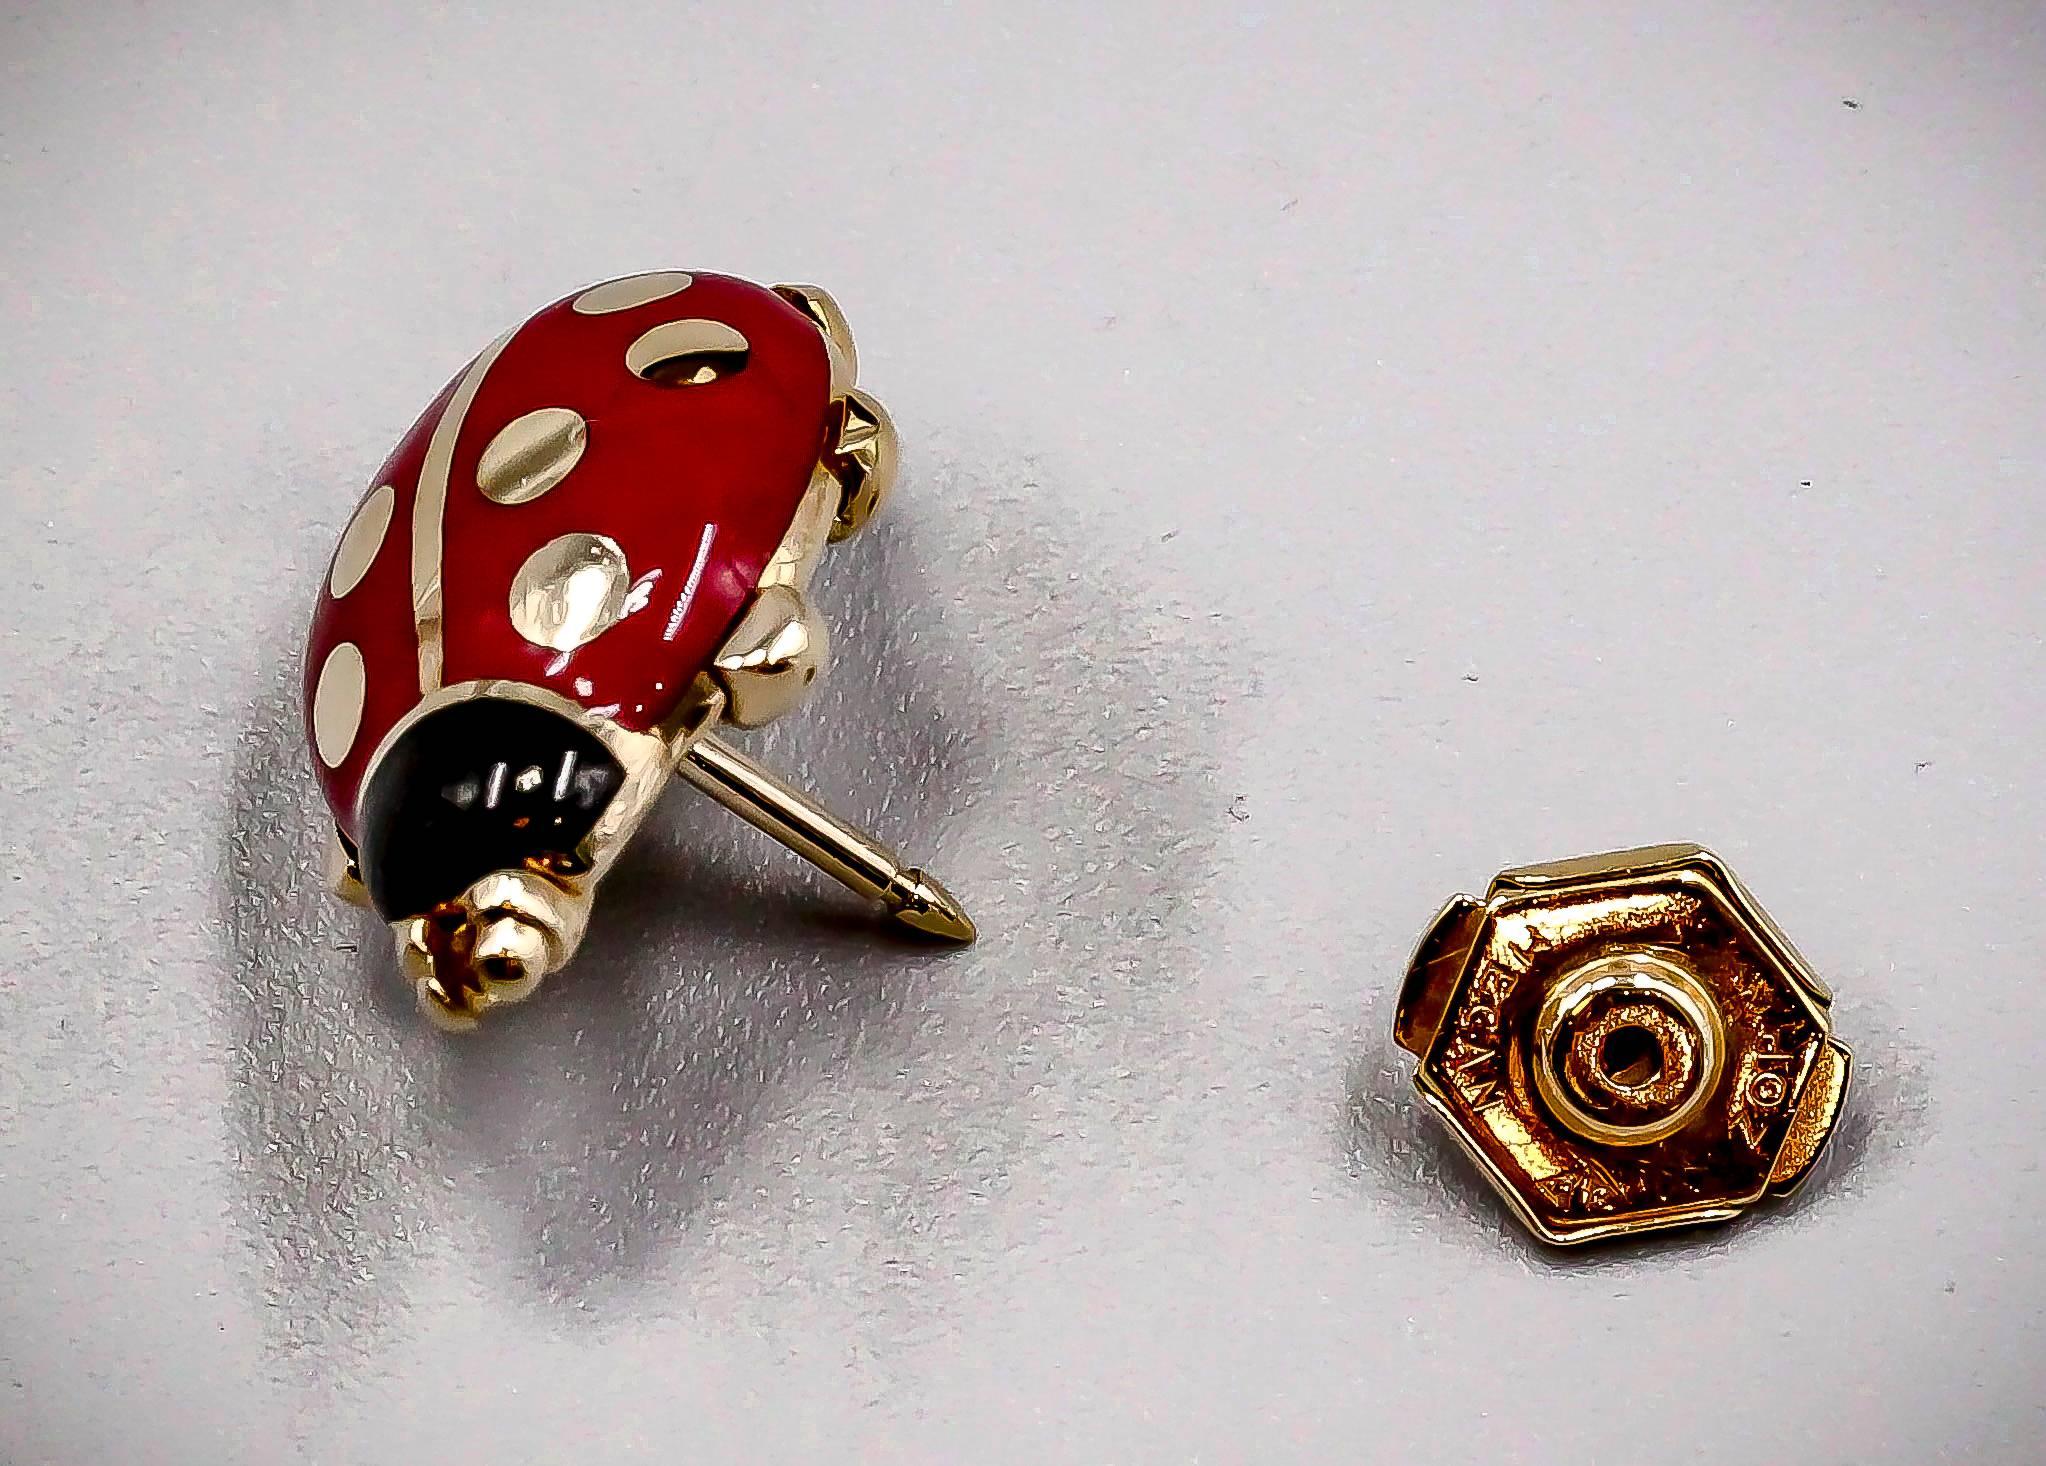 Whimsical 18K yellow gold and two color enamel pin by Cartier.  Designed as a ladybug, it features red and black enamel over 18k gold.  Circa 1990.

Hallmarks: Cartier, 1990, 750, reference numbers.